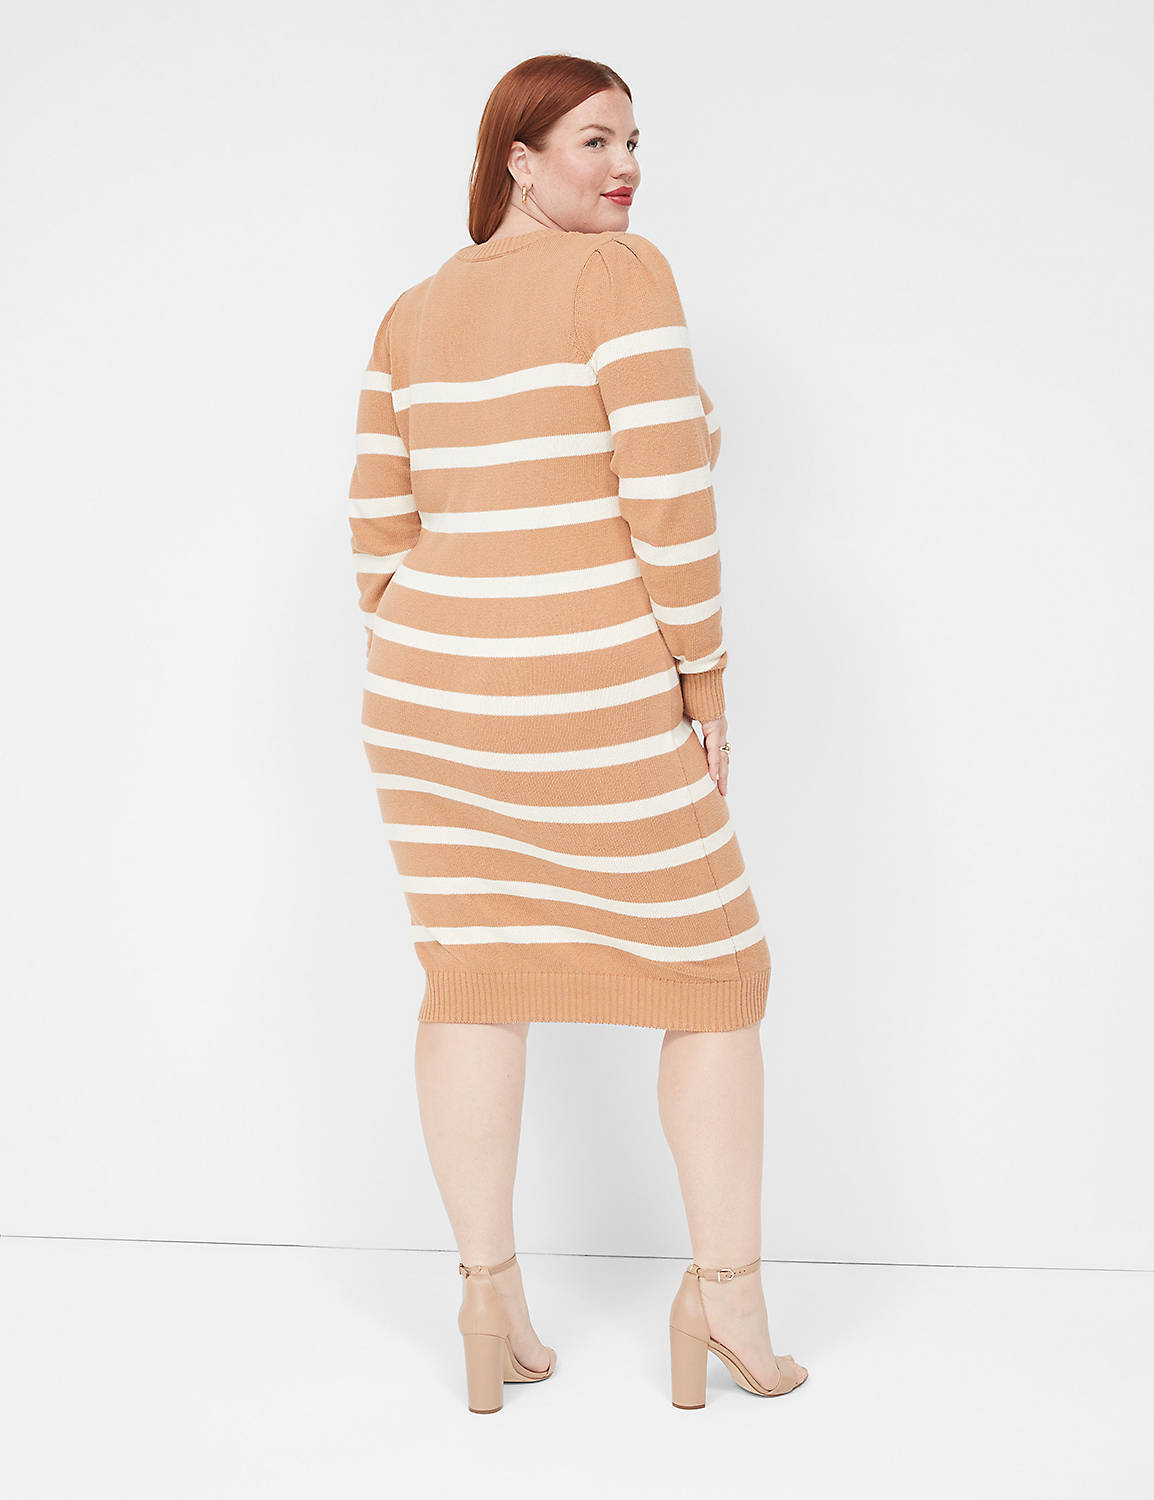 Long Puff Sleeve Striped Crew Neck Product Image 2